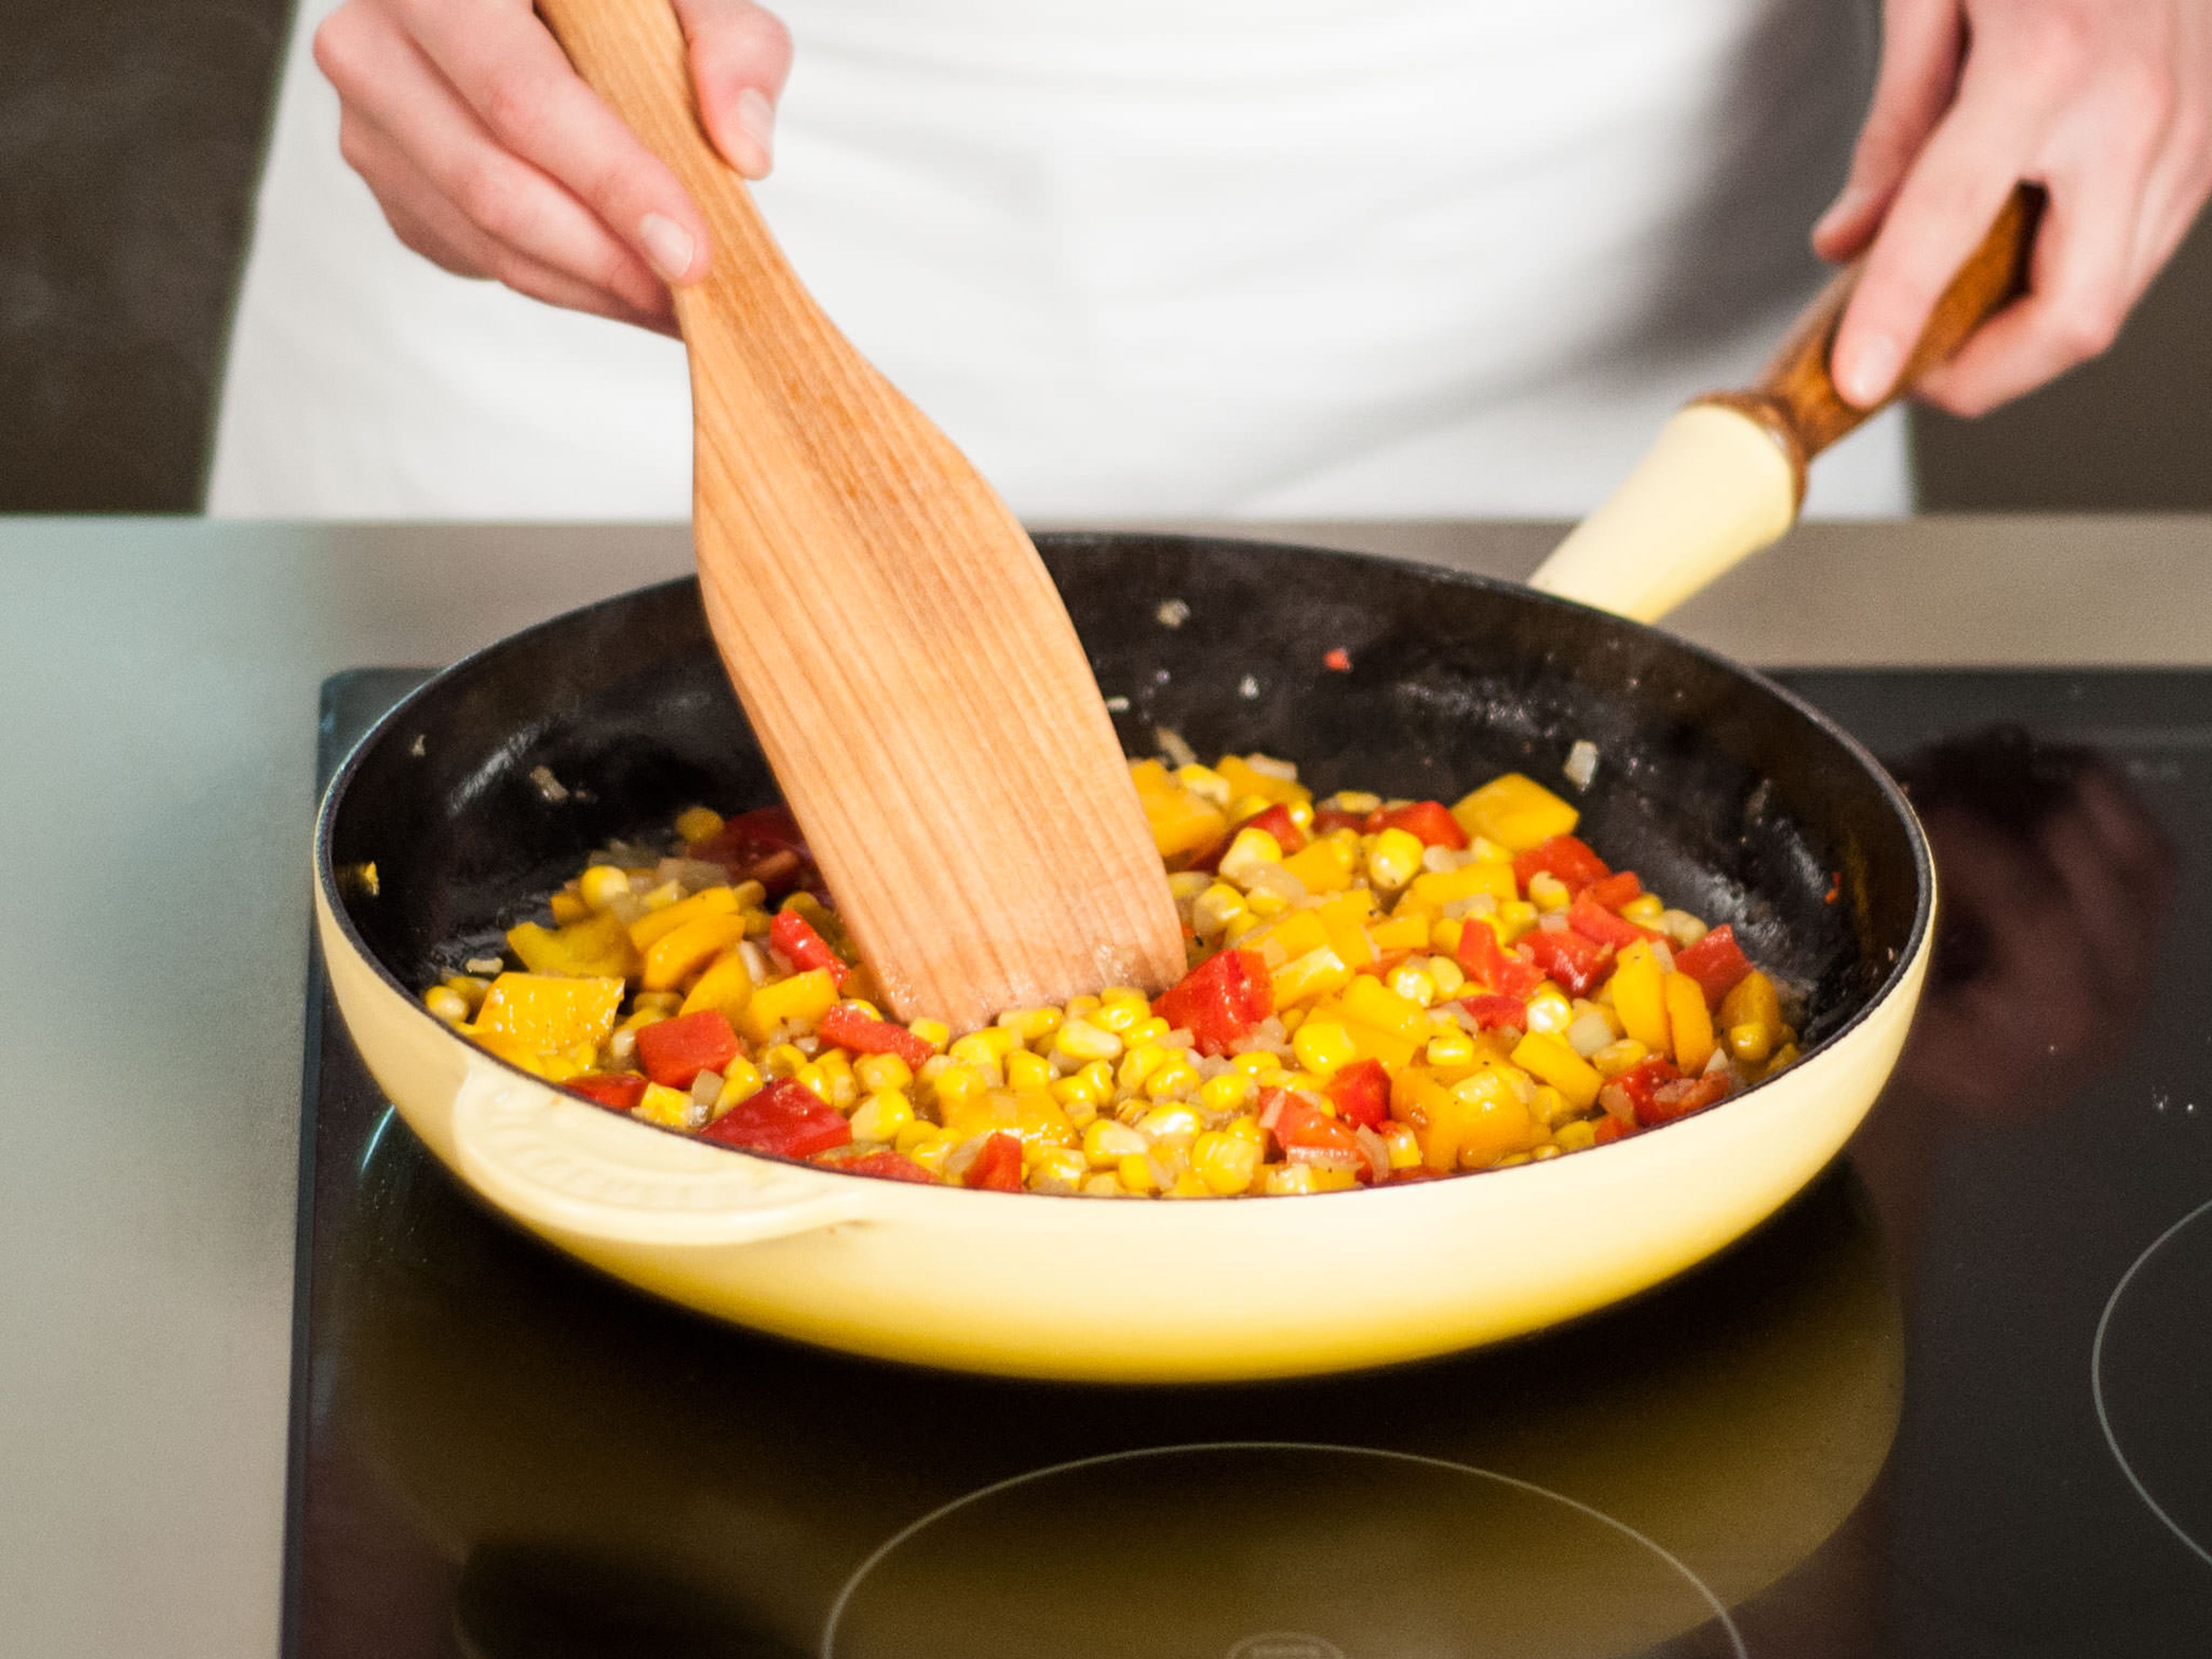 In a frying pan, sauté onion, garlic, peppers, and corn in some vegetable oil over medium heat for approx. 5 - 7 min. until onions are translucent and garlic is lightly browned. Season with salt and pepper.